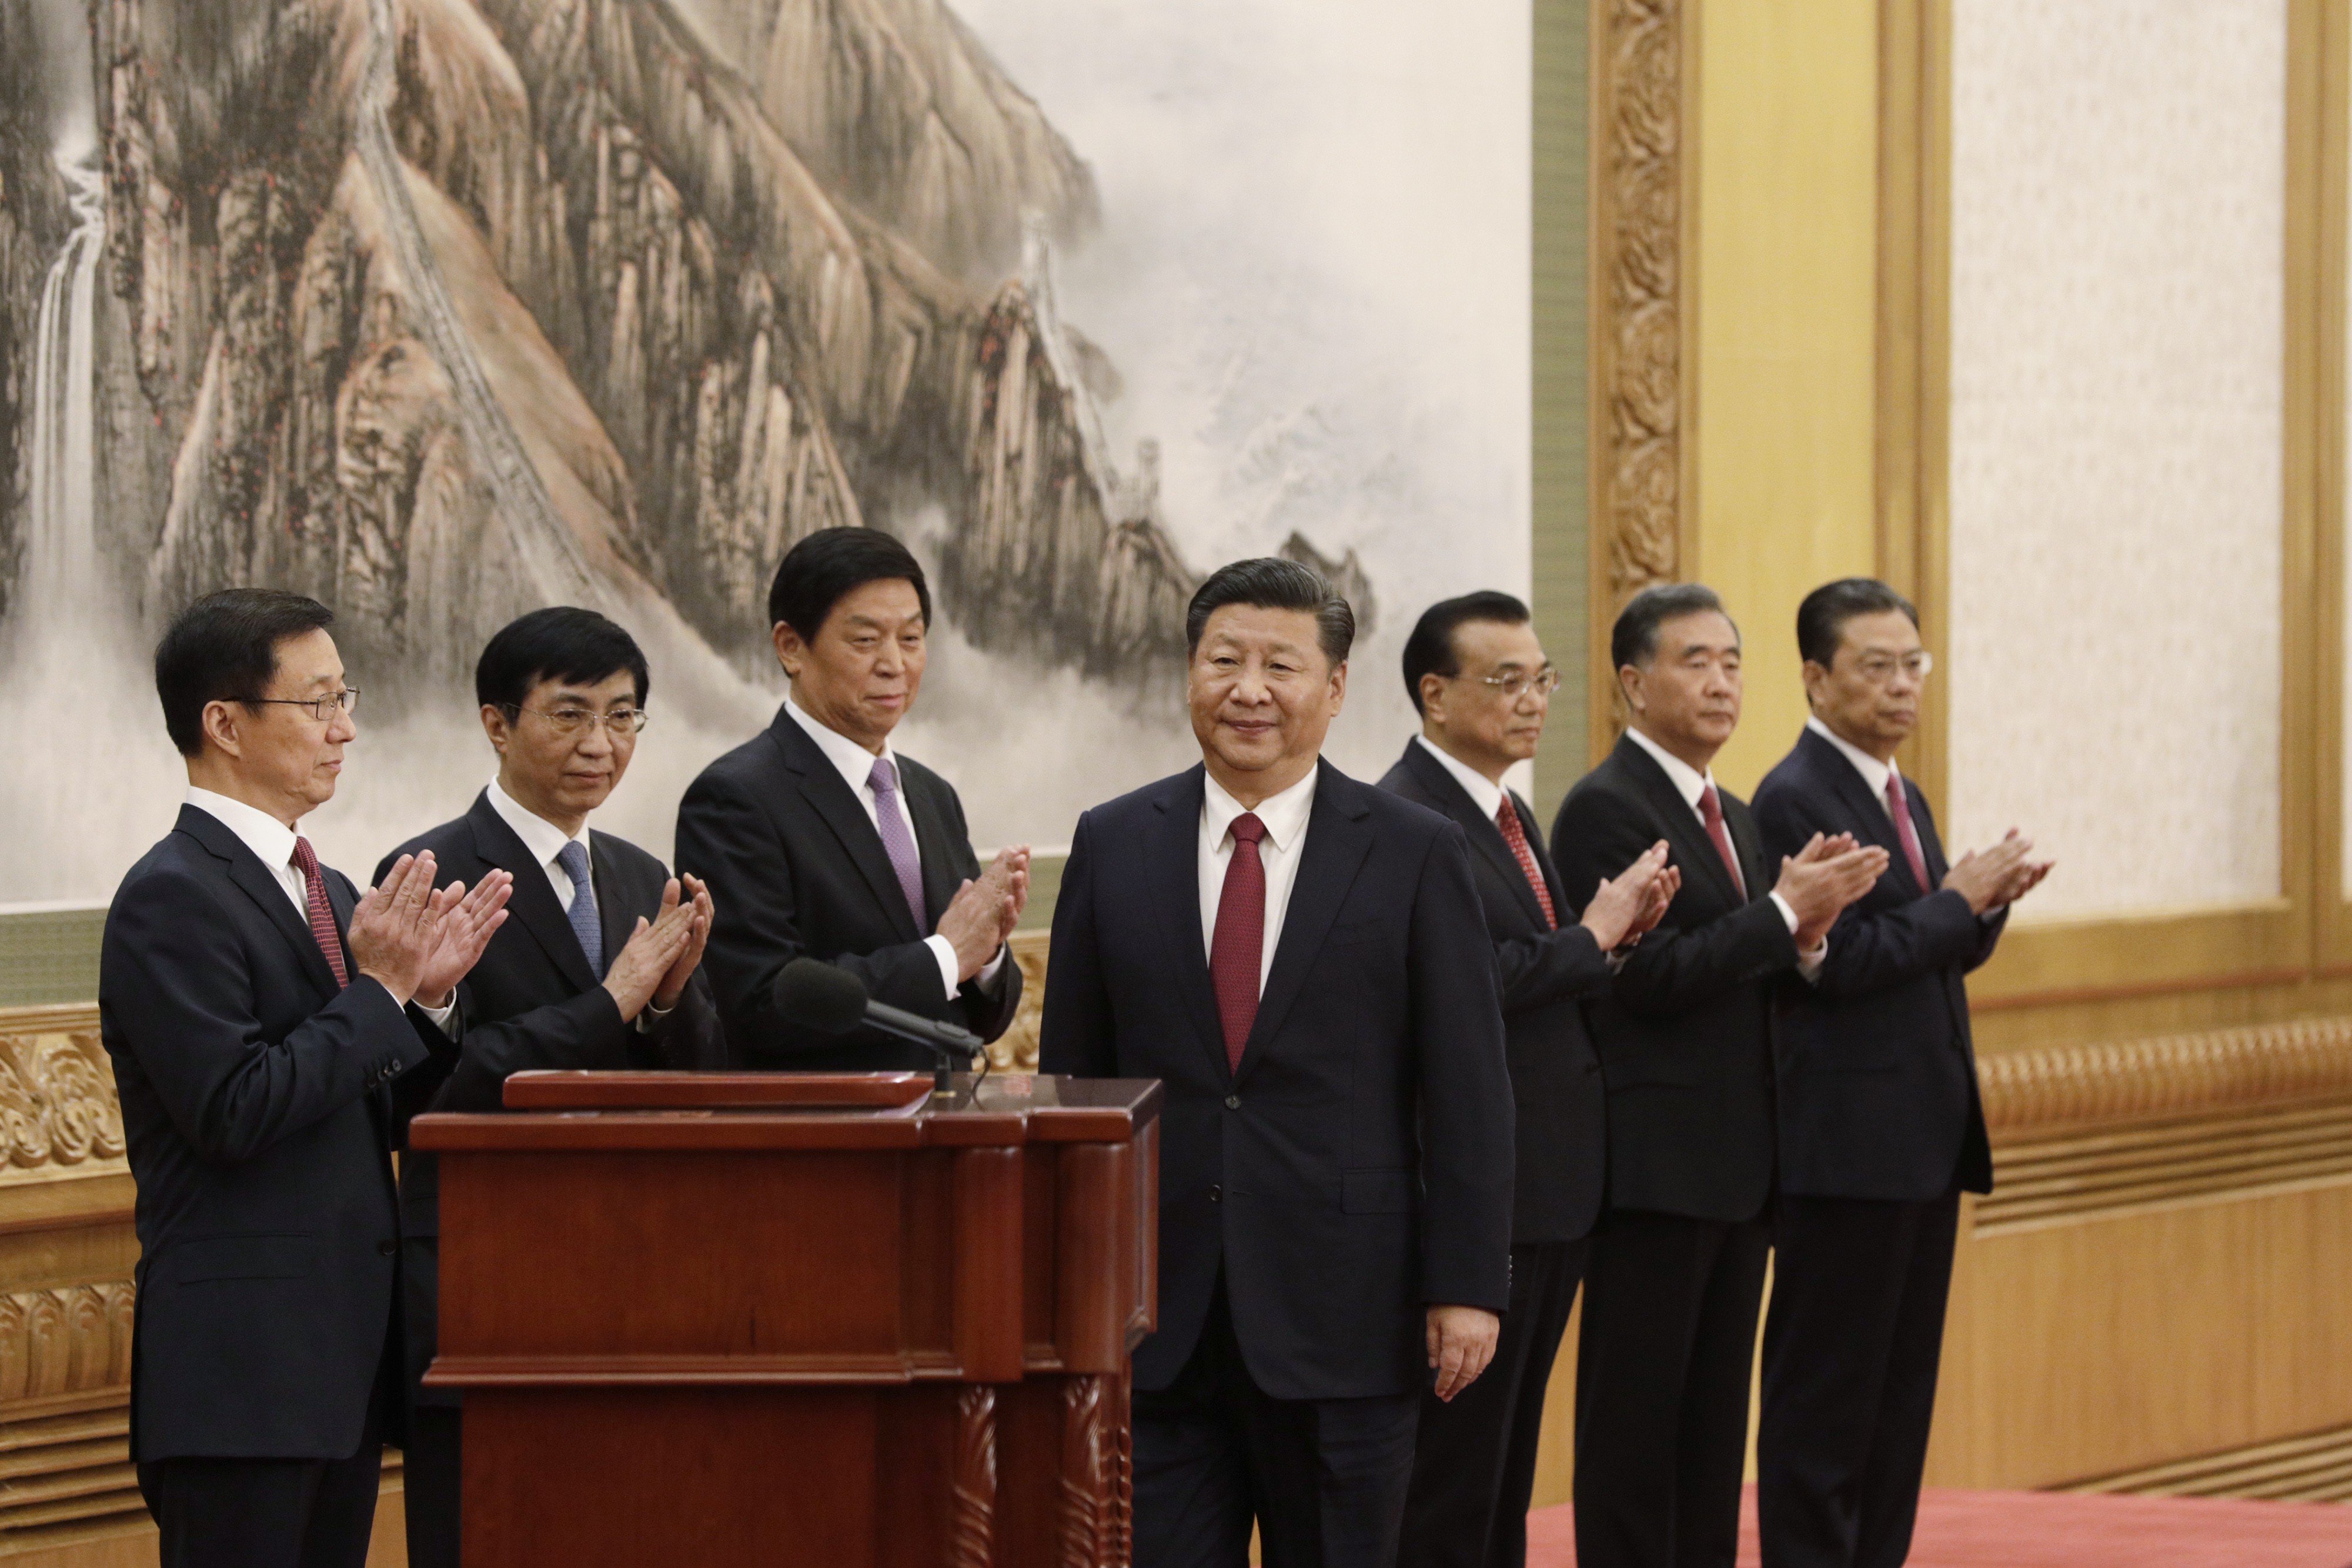 Where are the women? Chinas new leadership reveals equality is a low priority South China Morning Post photo